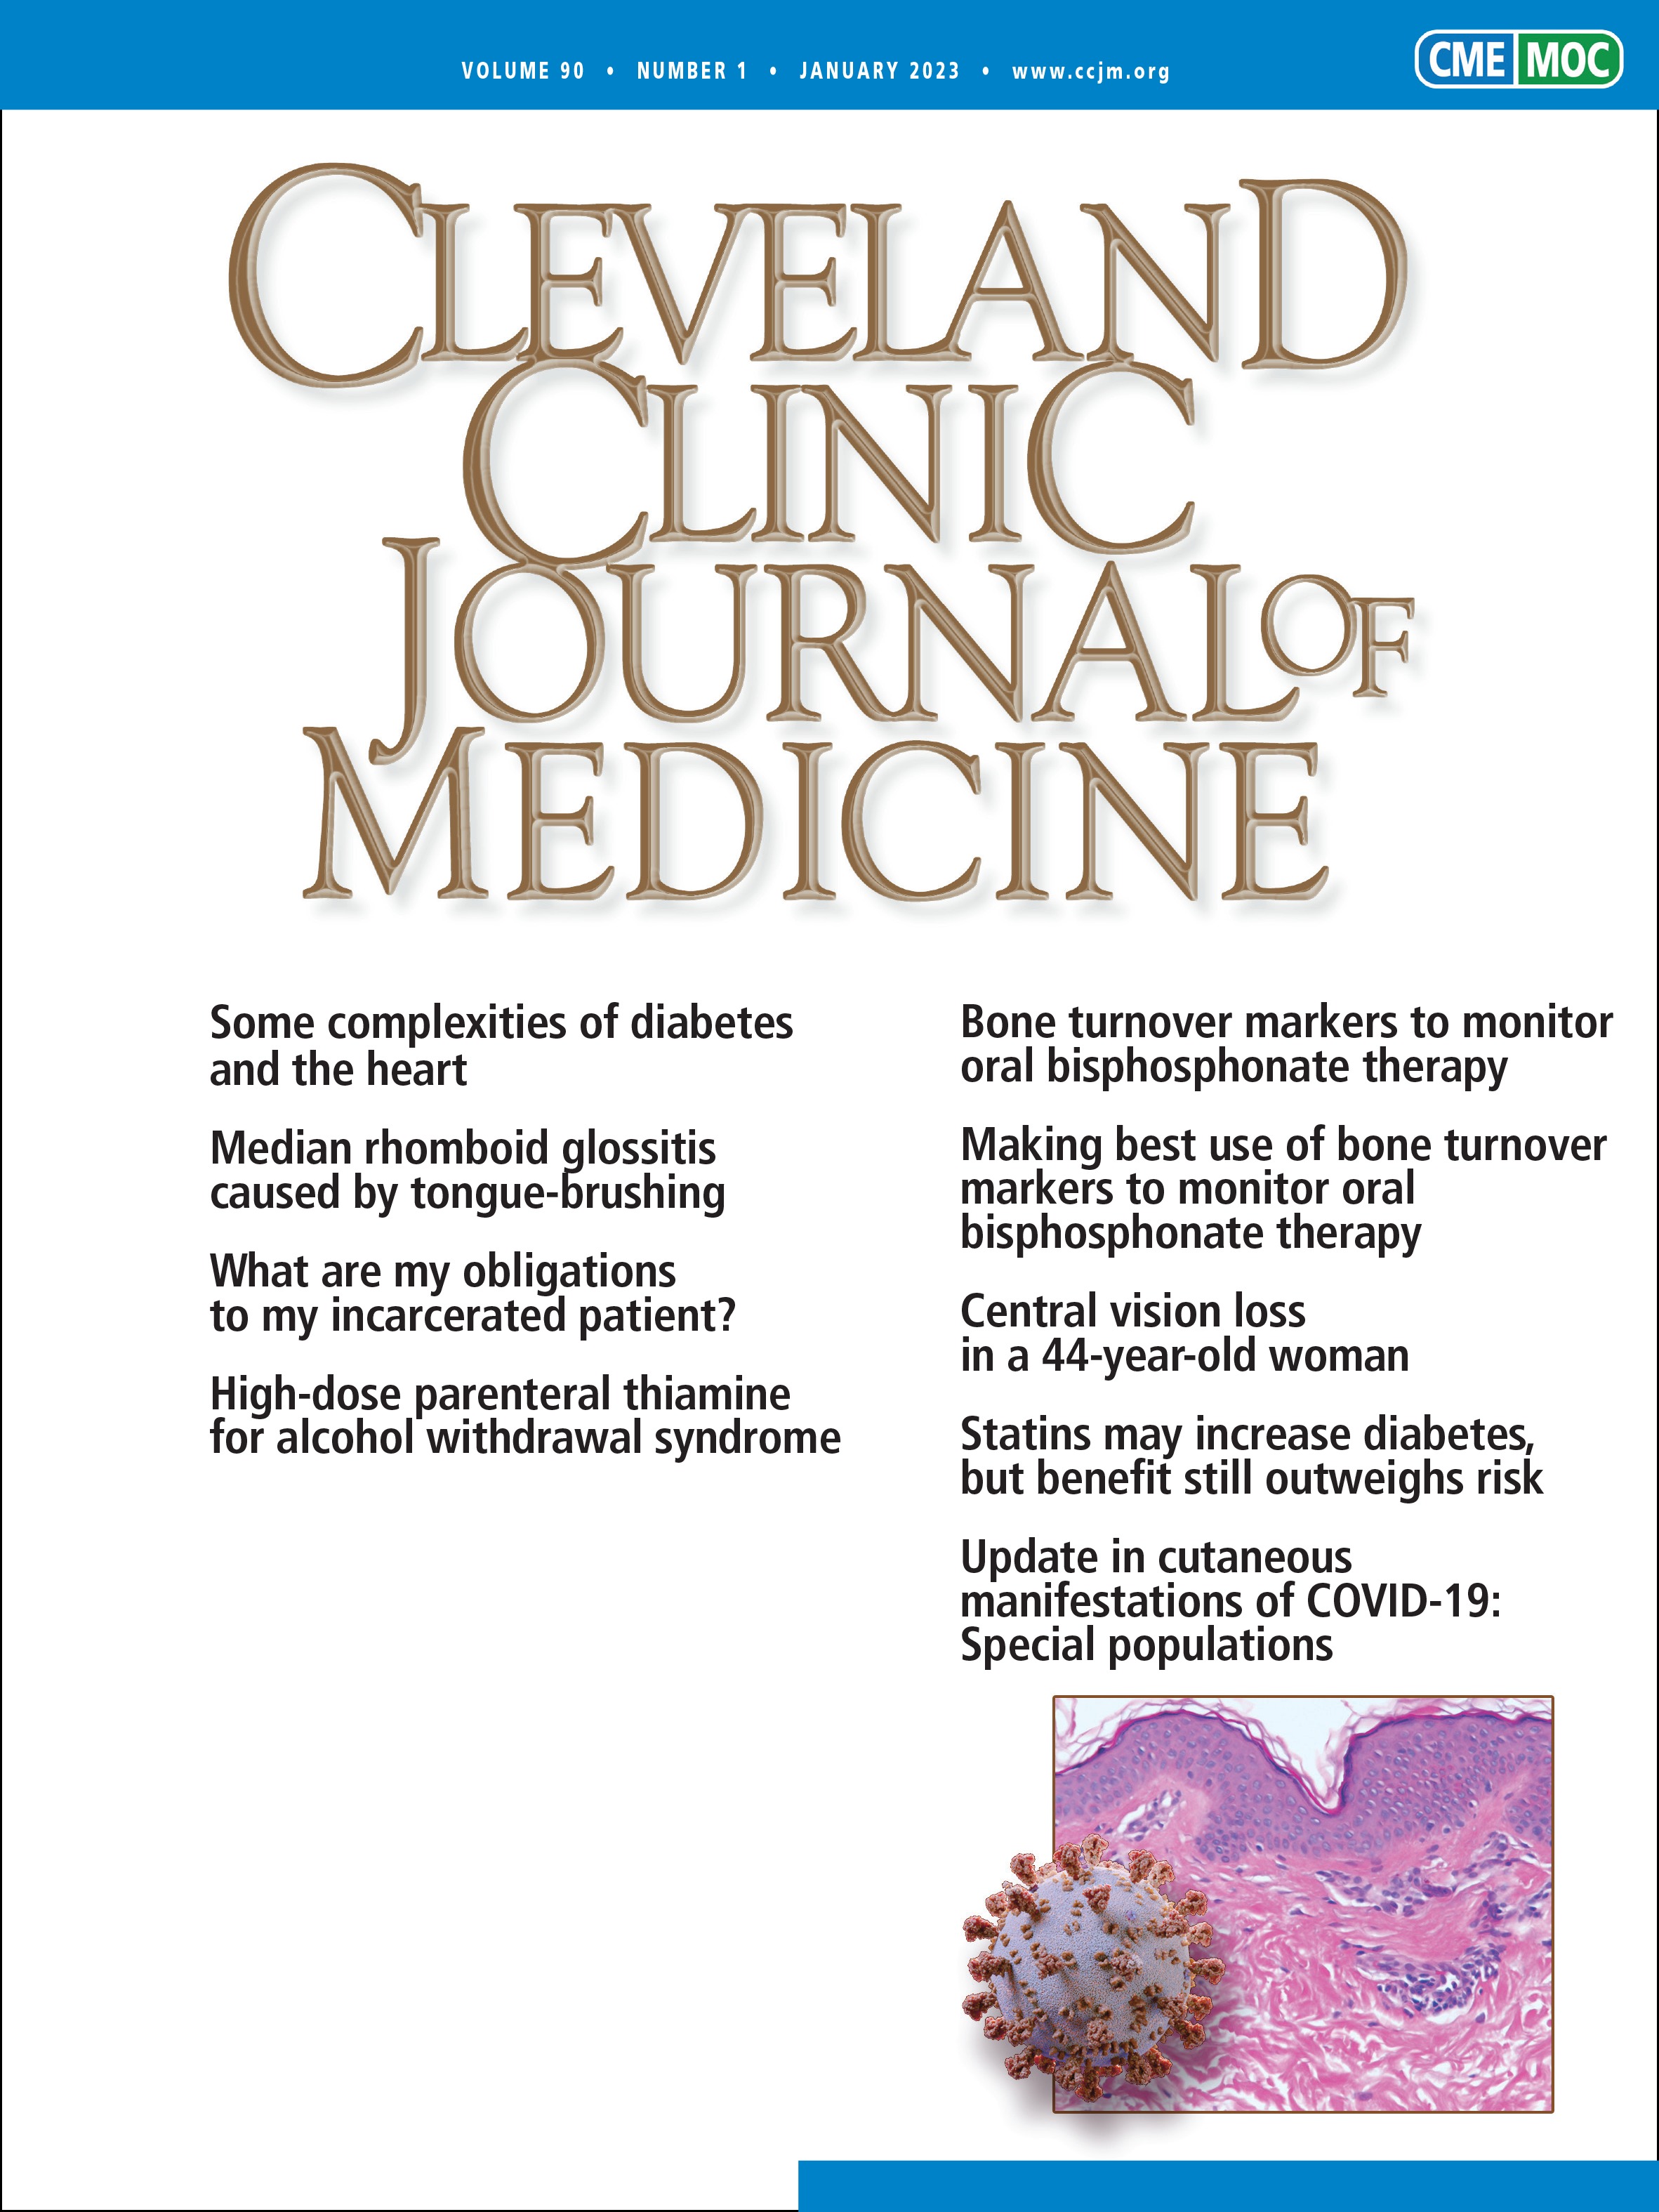 Update in cutaneous manifestations of COVID-19: Special populations